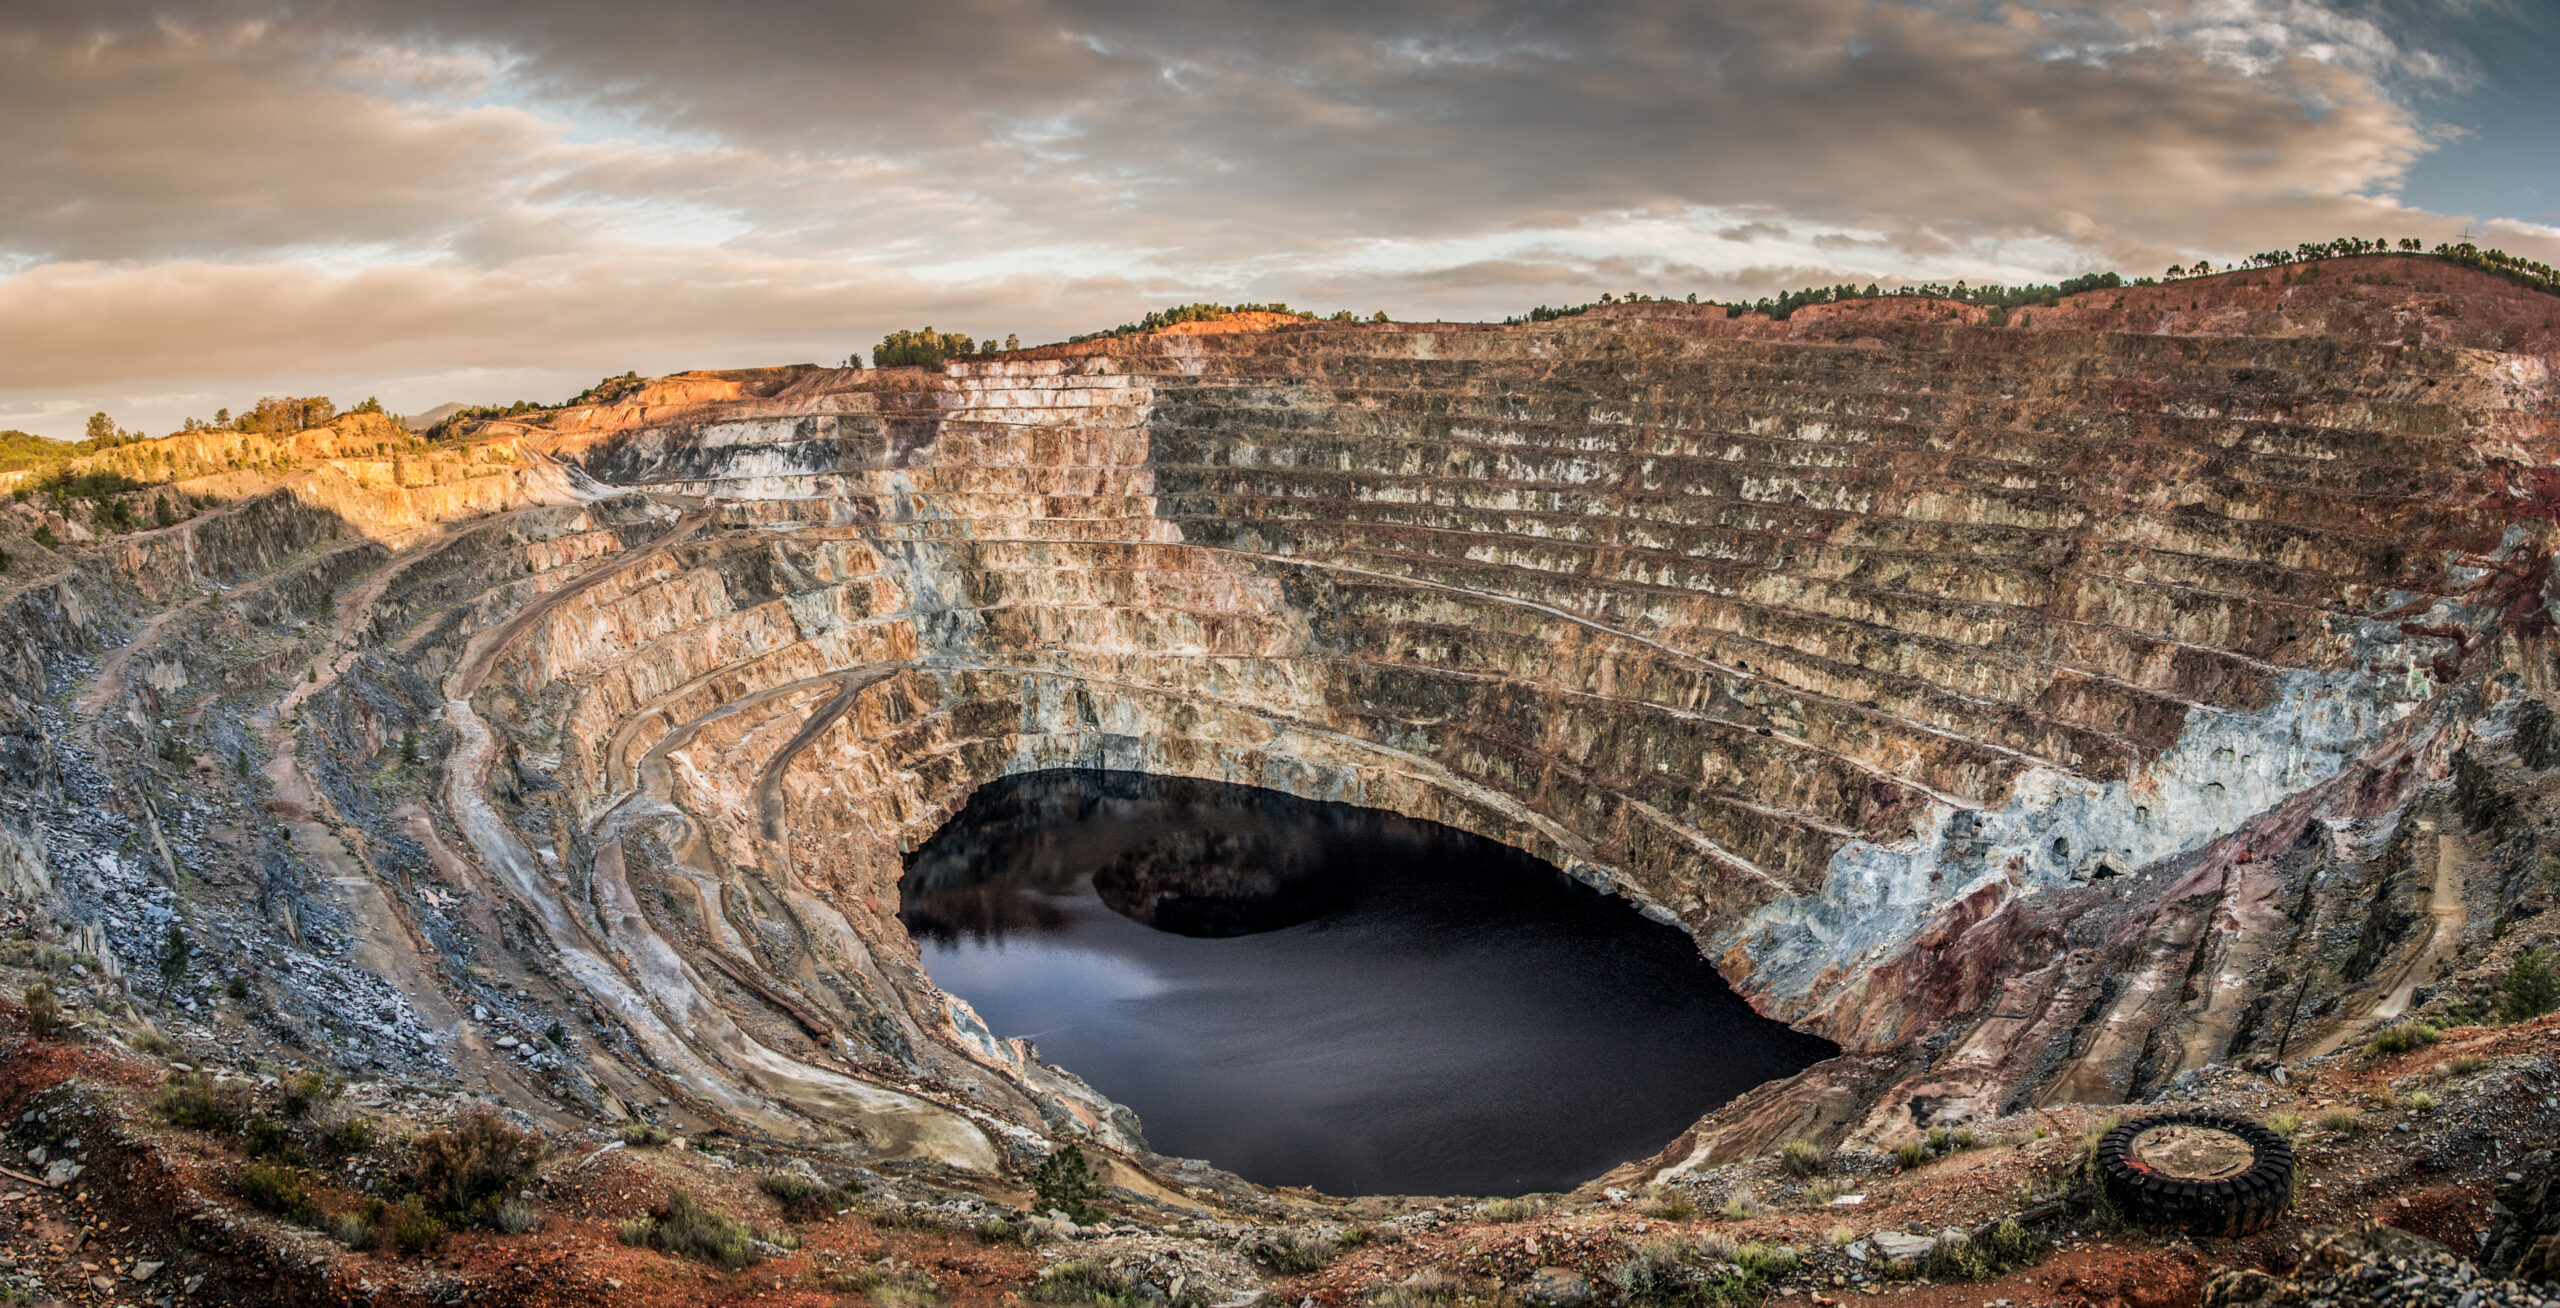 Opencast mine, now abandoned in Huelva Rio Tinto mines. one of the opencast mines largest in the world. seven panoramic photographs